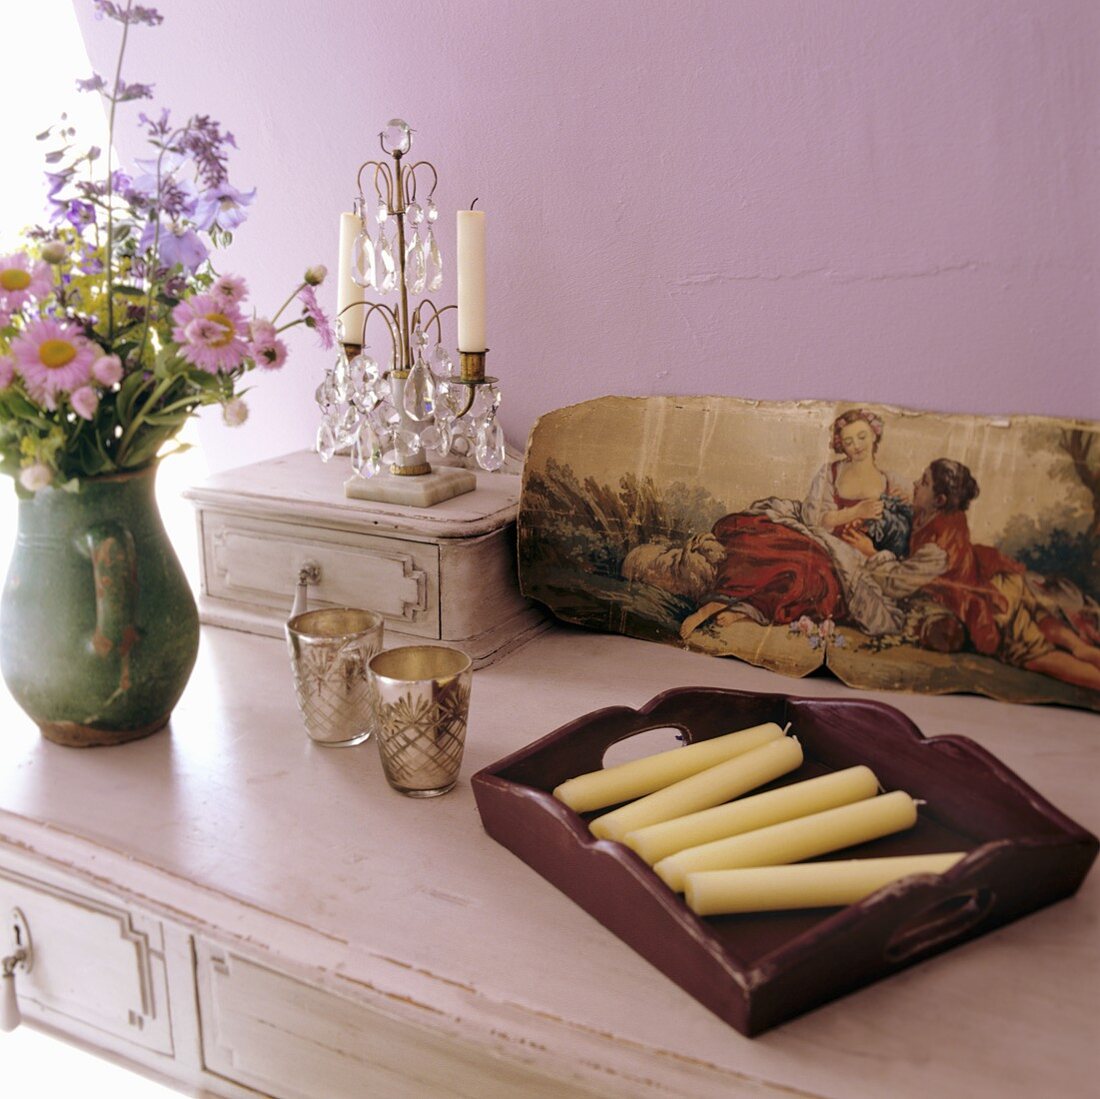 Candles, flowers and a picture on a sideboard